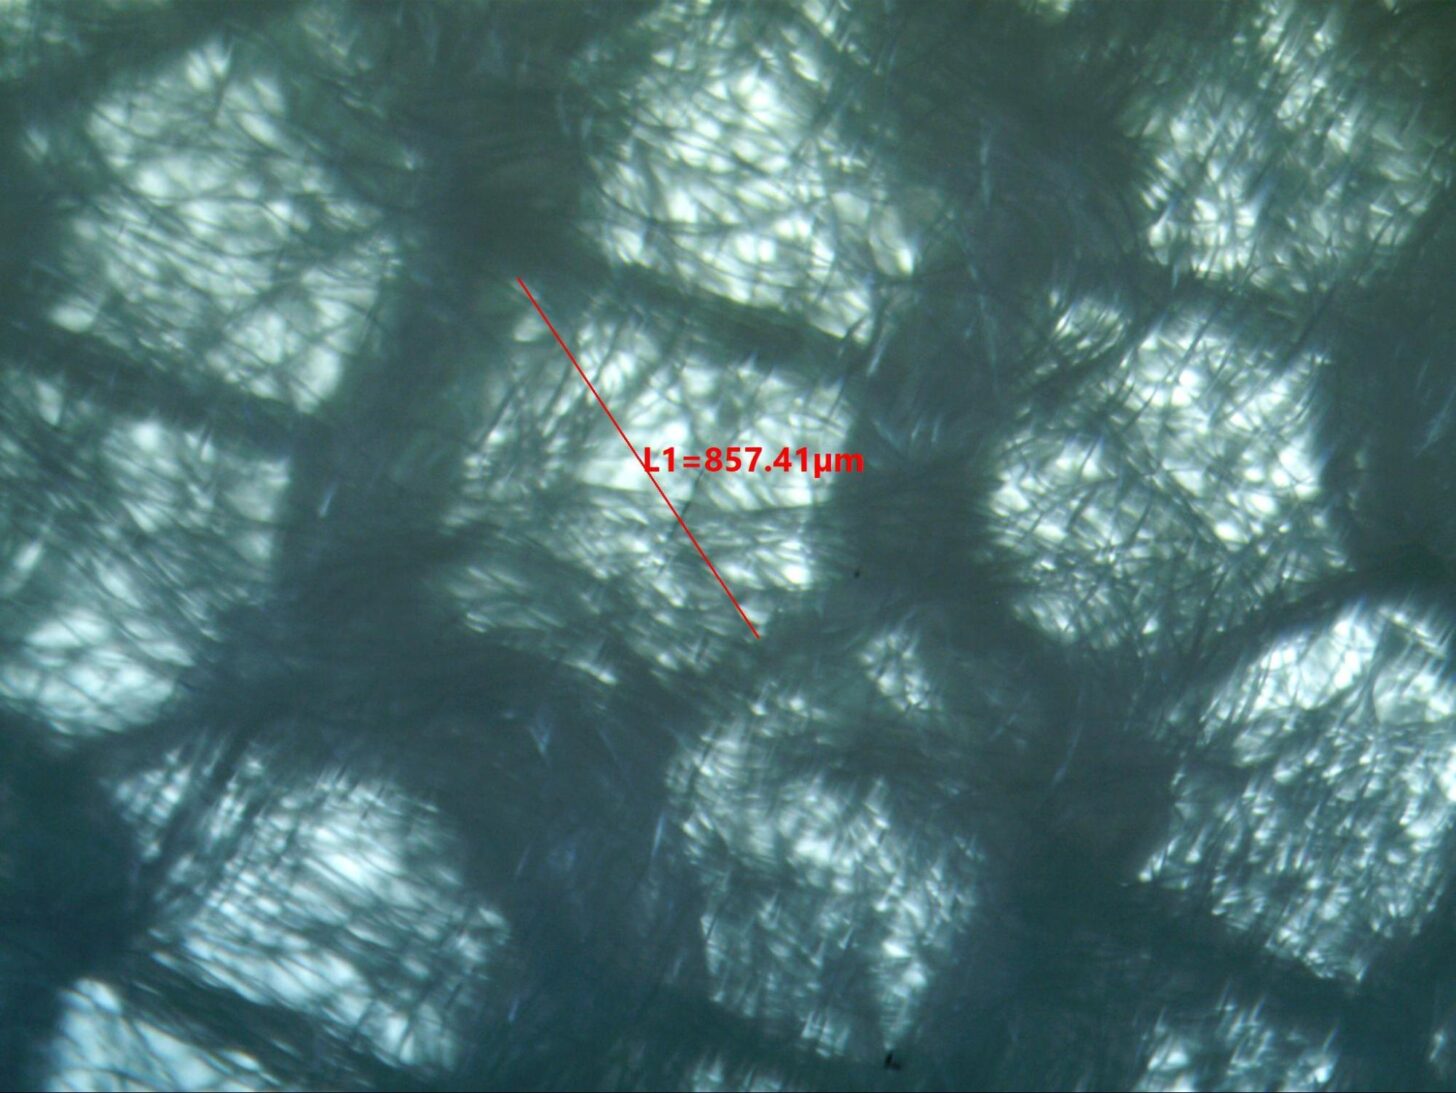 Polartec Alpha, Low Magnification Photomicrograph showing support grid (grid pore diameter about 850 microns).